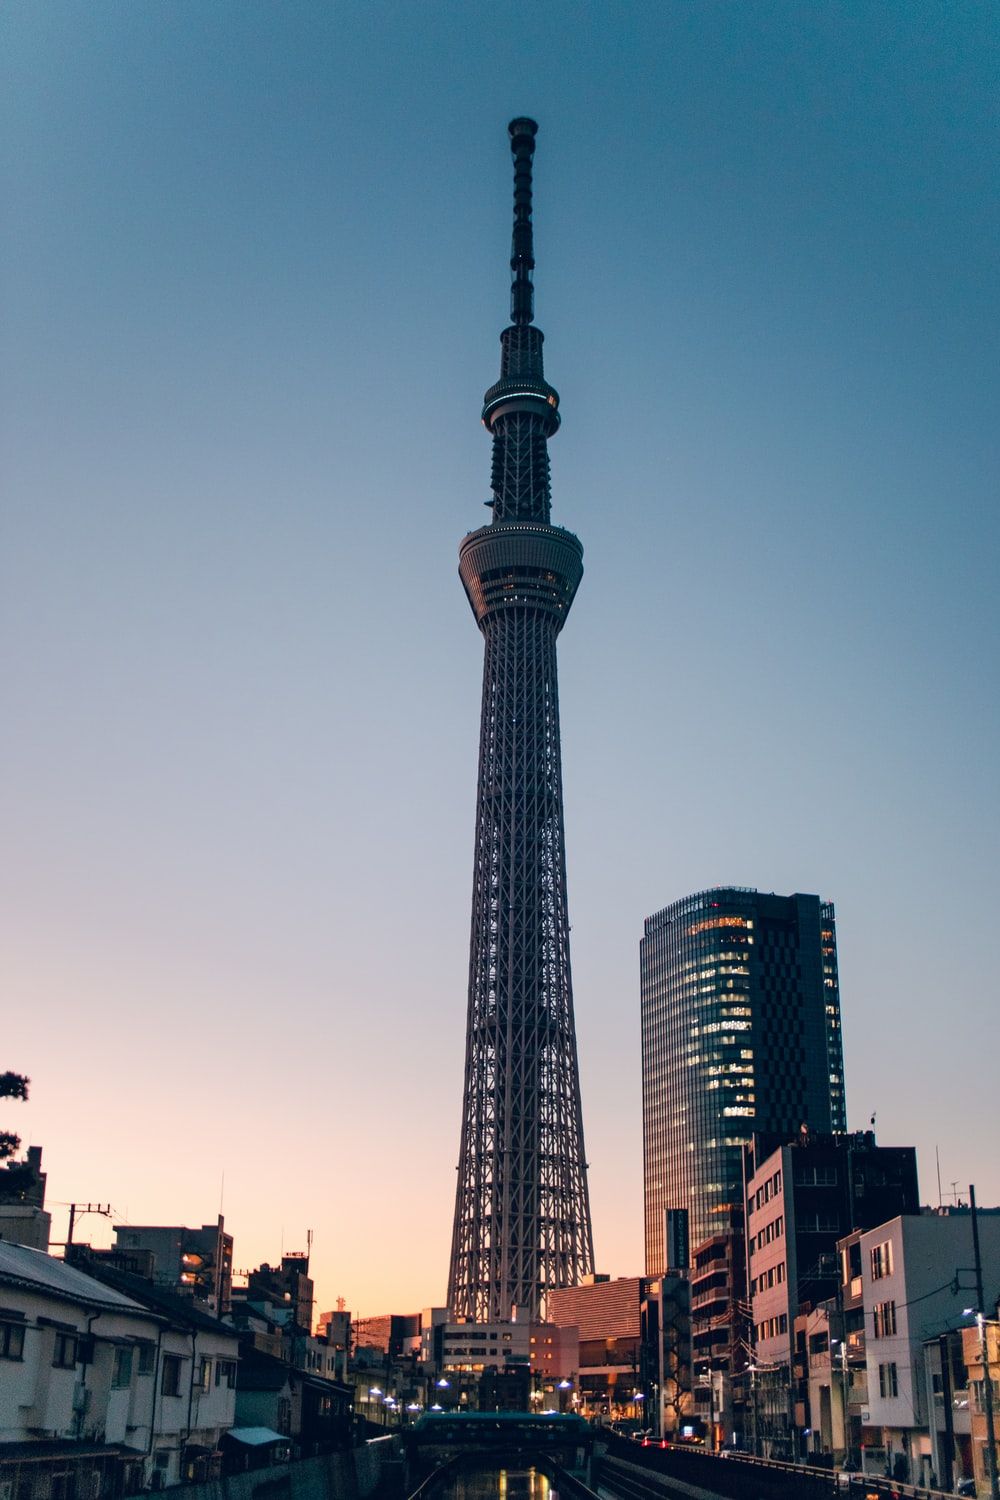 Tokyo Skytree Picture. Download Free Image